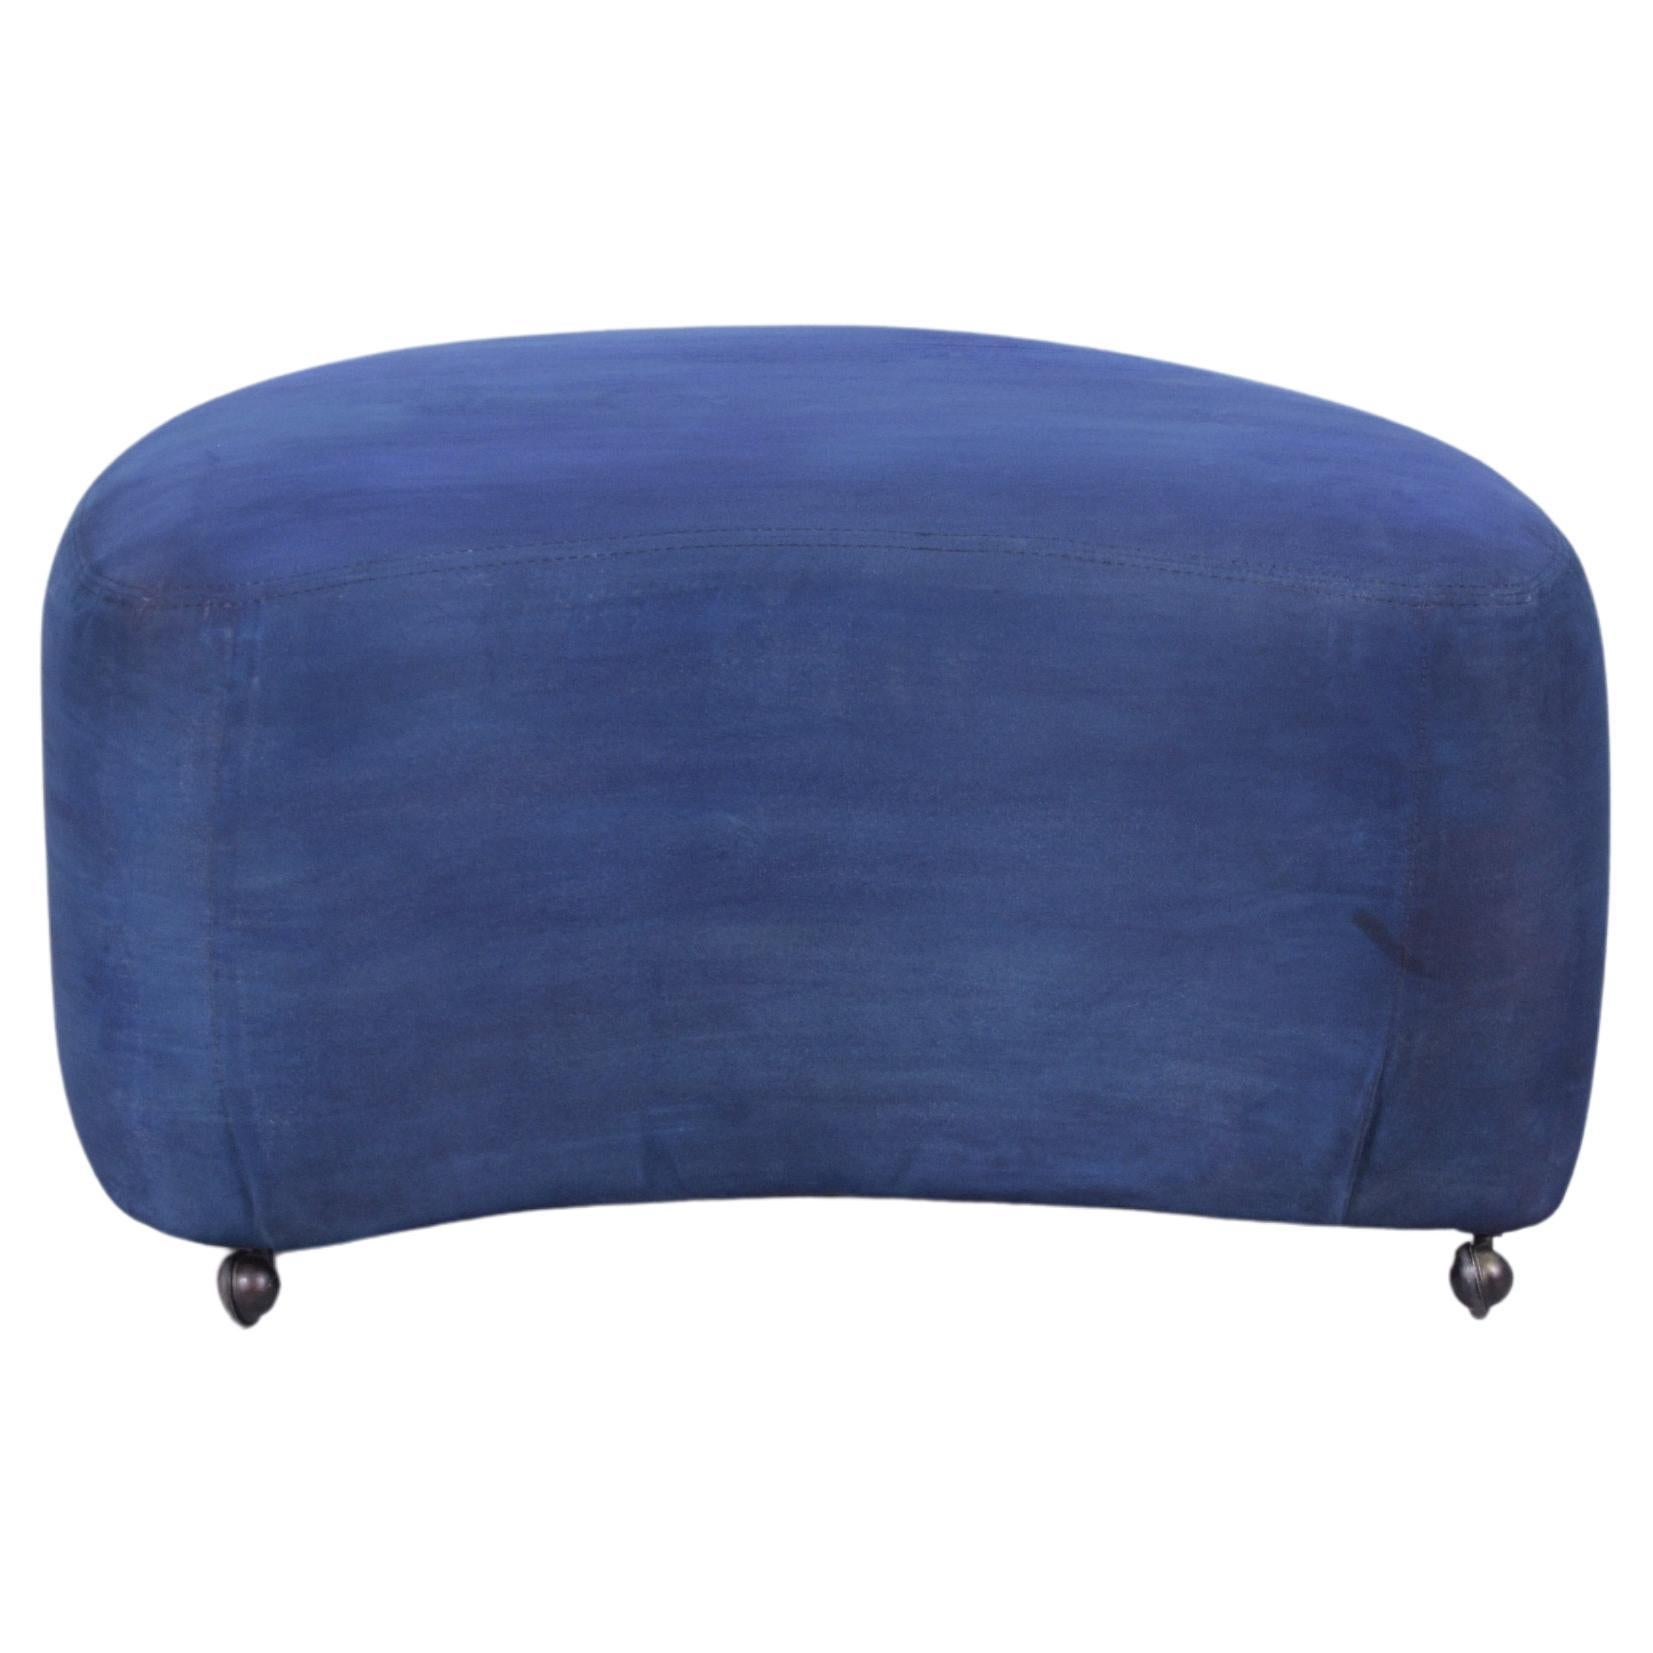 Mid-Century Modern Ottoman in Navy Blue Suede with Caster Wheels